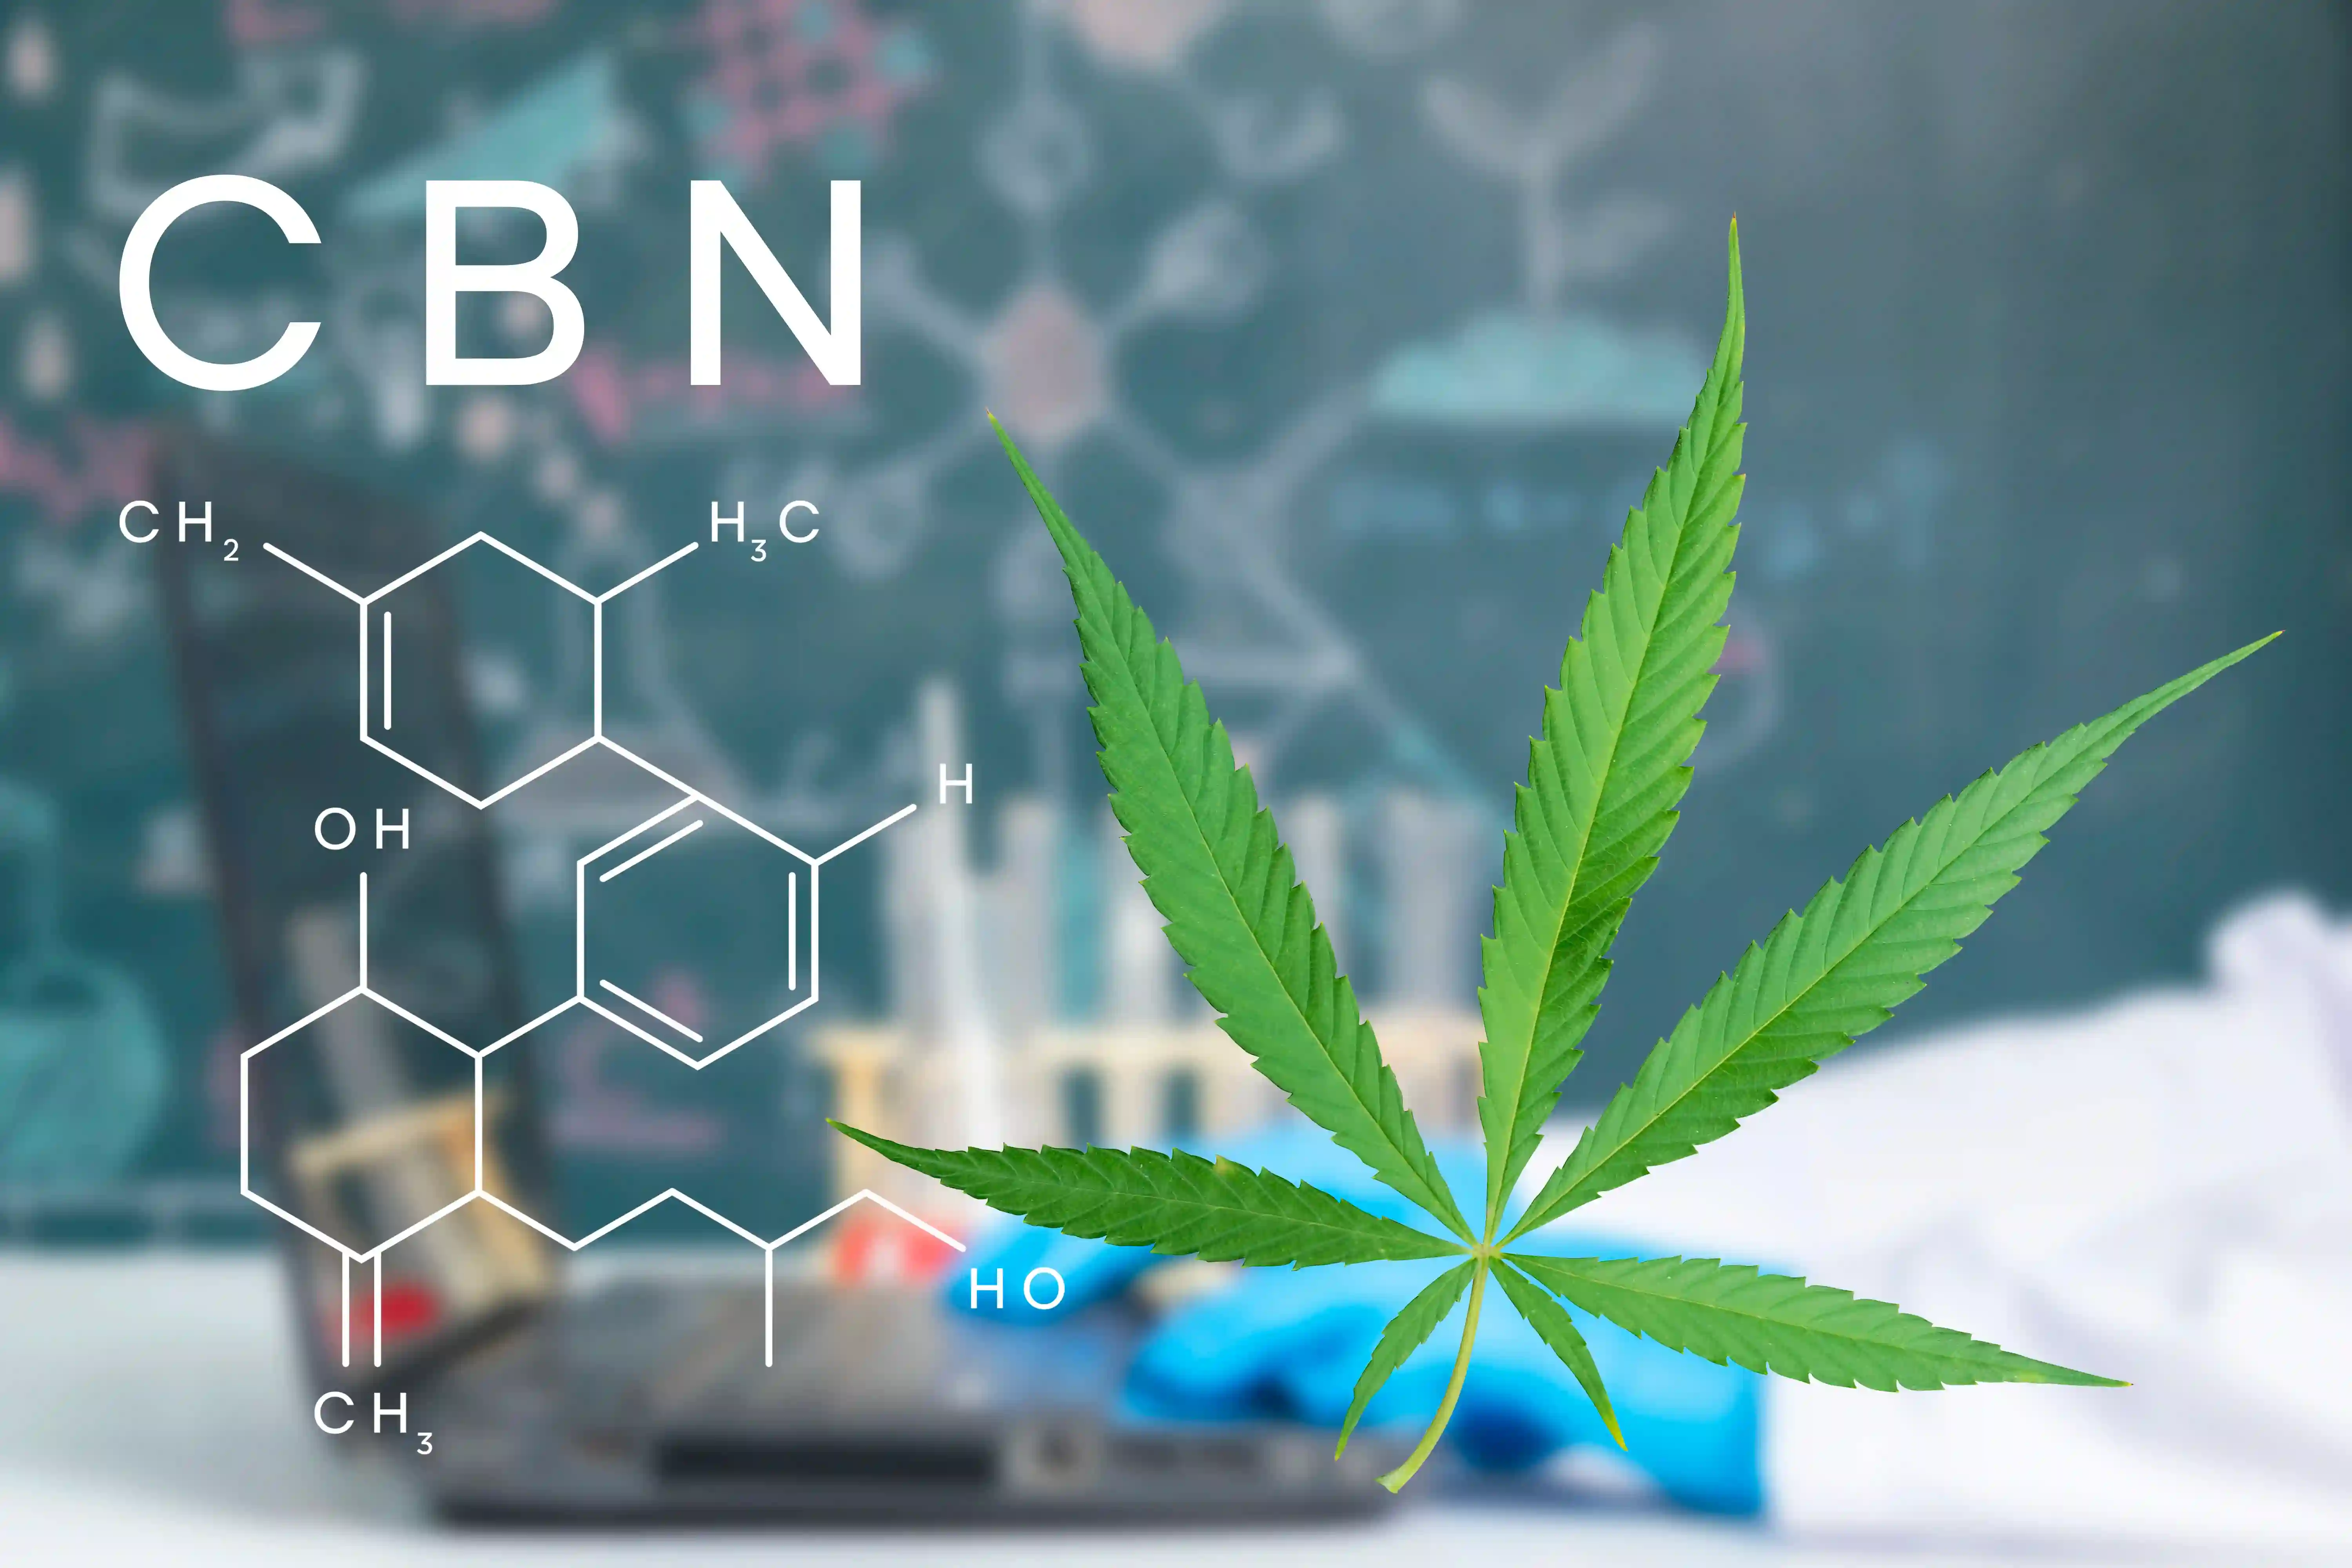 CBN: A Cannabinoid For Sleep And More